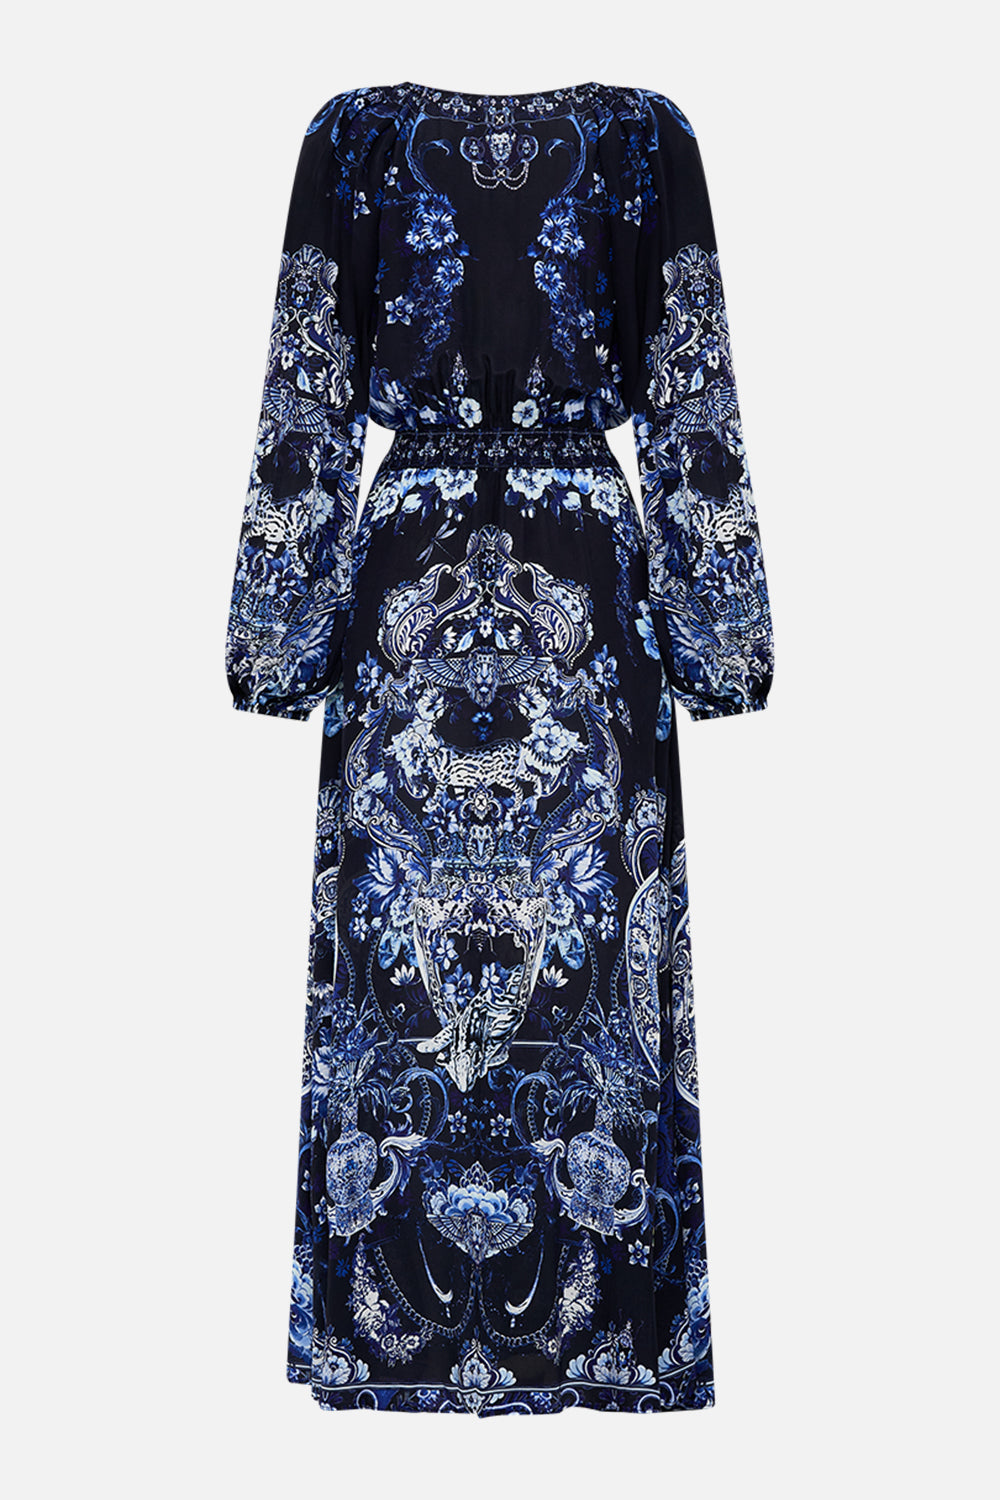 Back view of CAMILLA silk dress in Delft Dynasty print